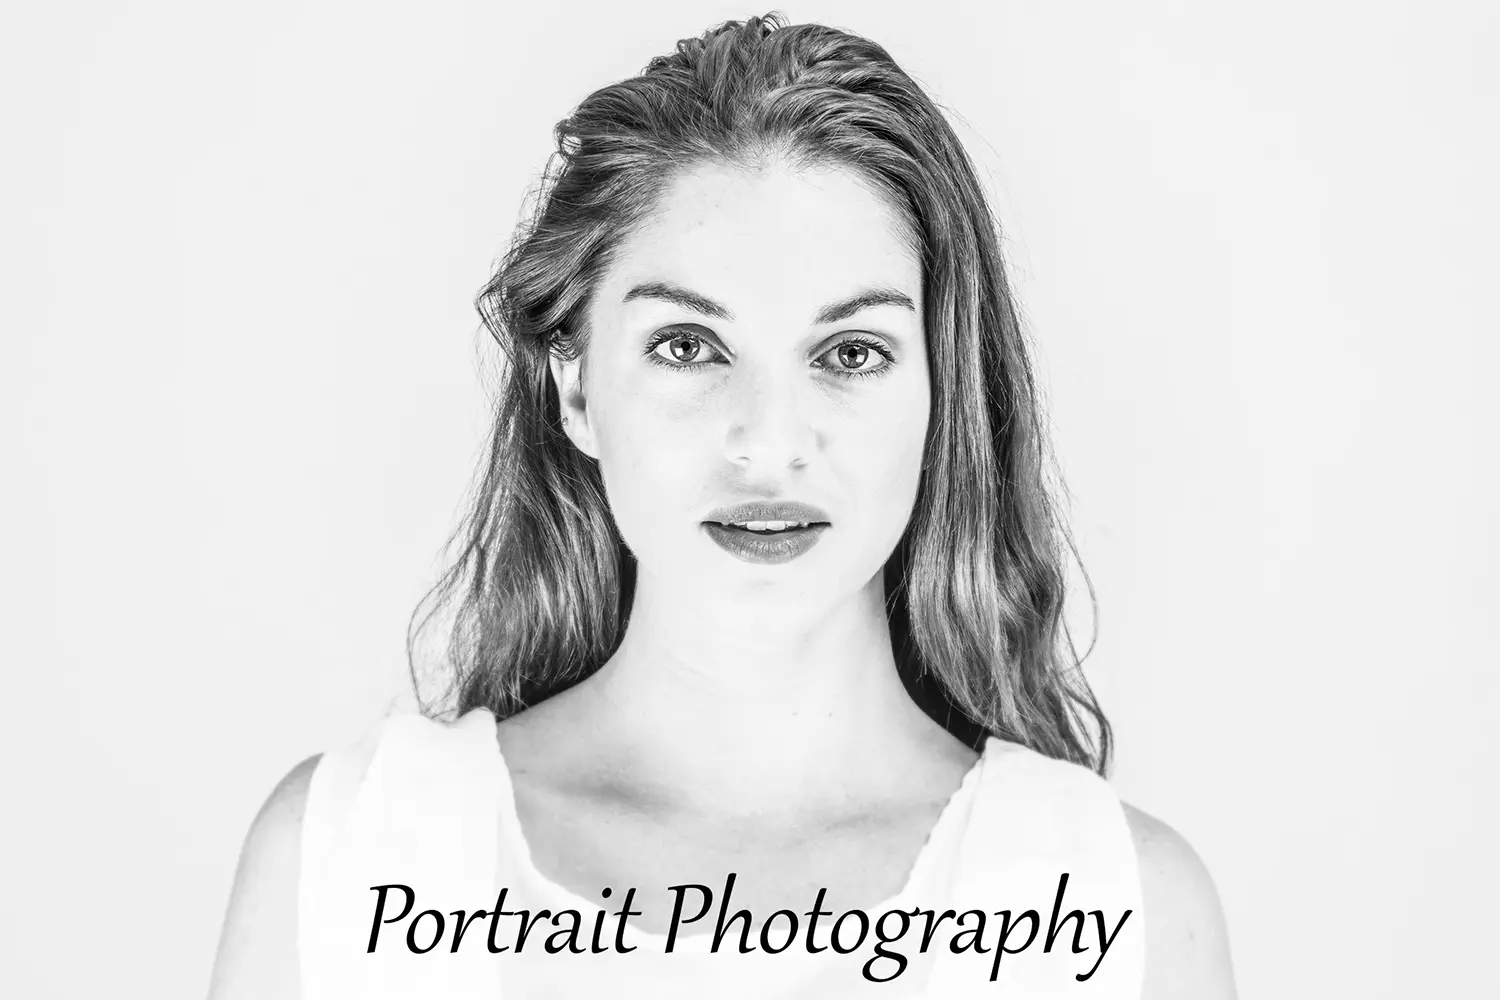 Black and white headshot of attractive young woman